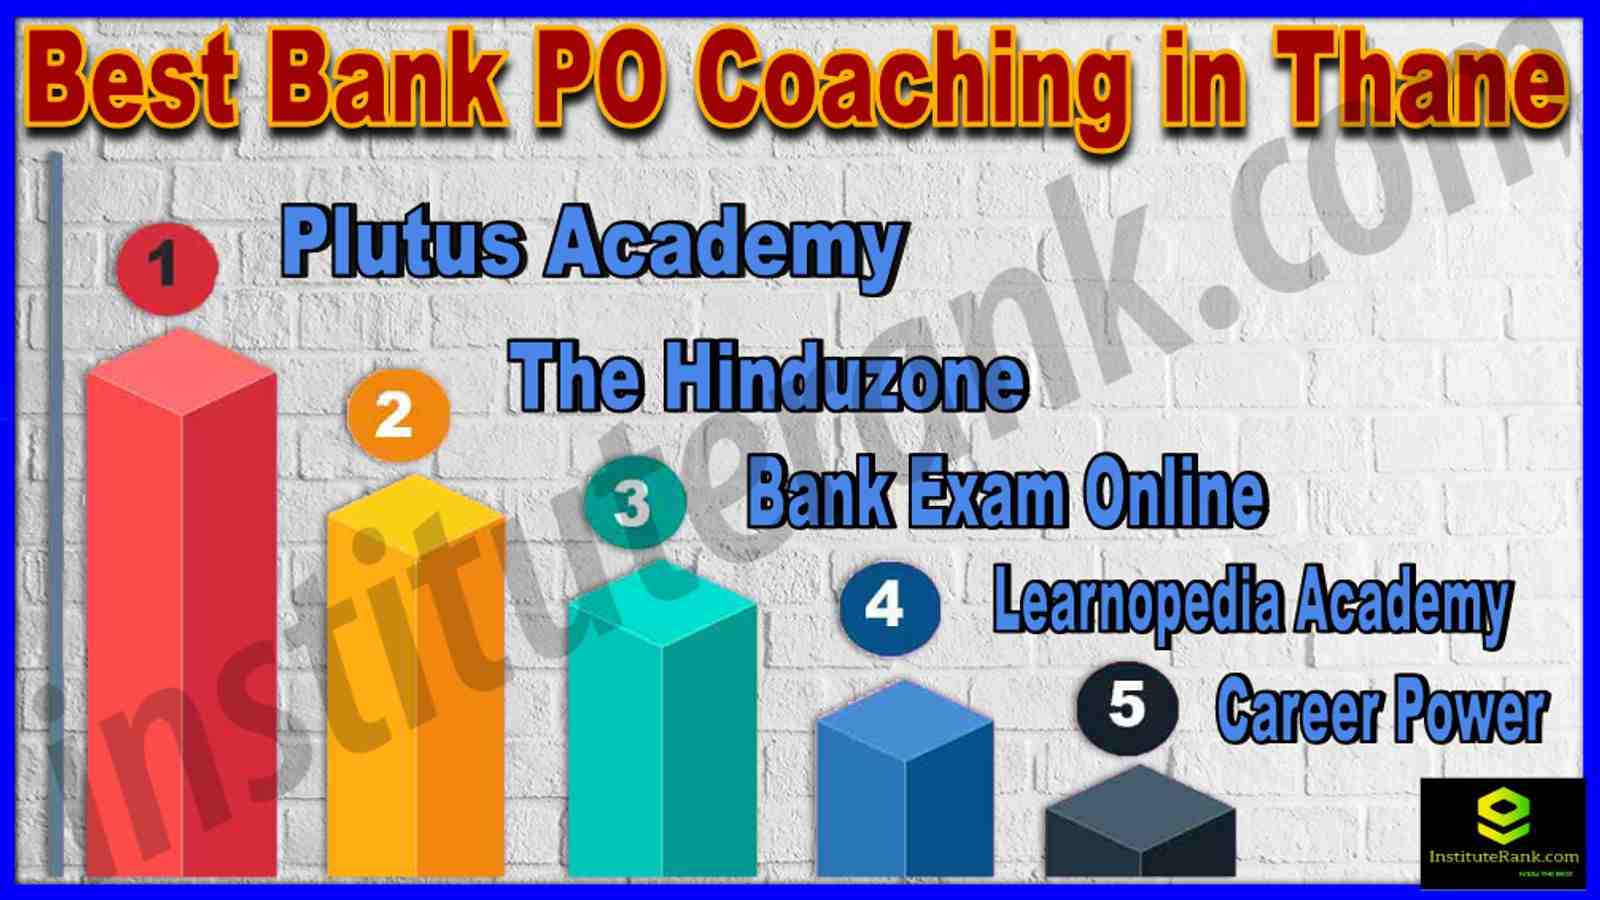 Best Bank PO Coaching in Thane